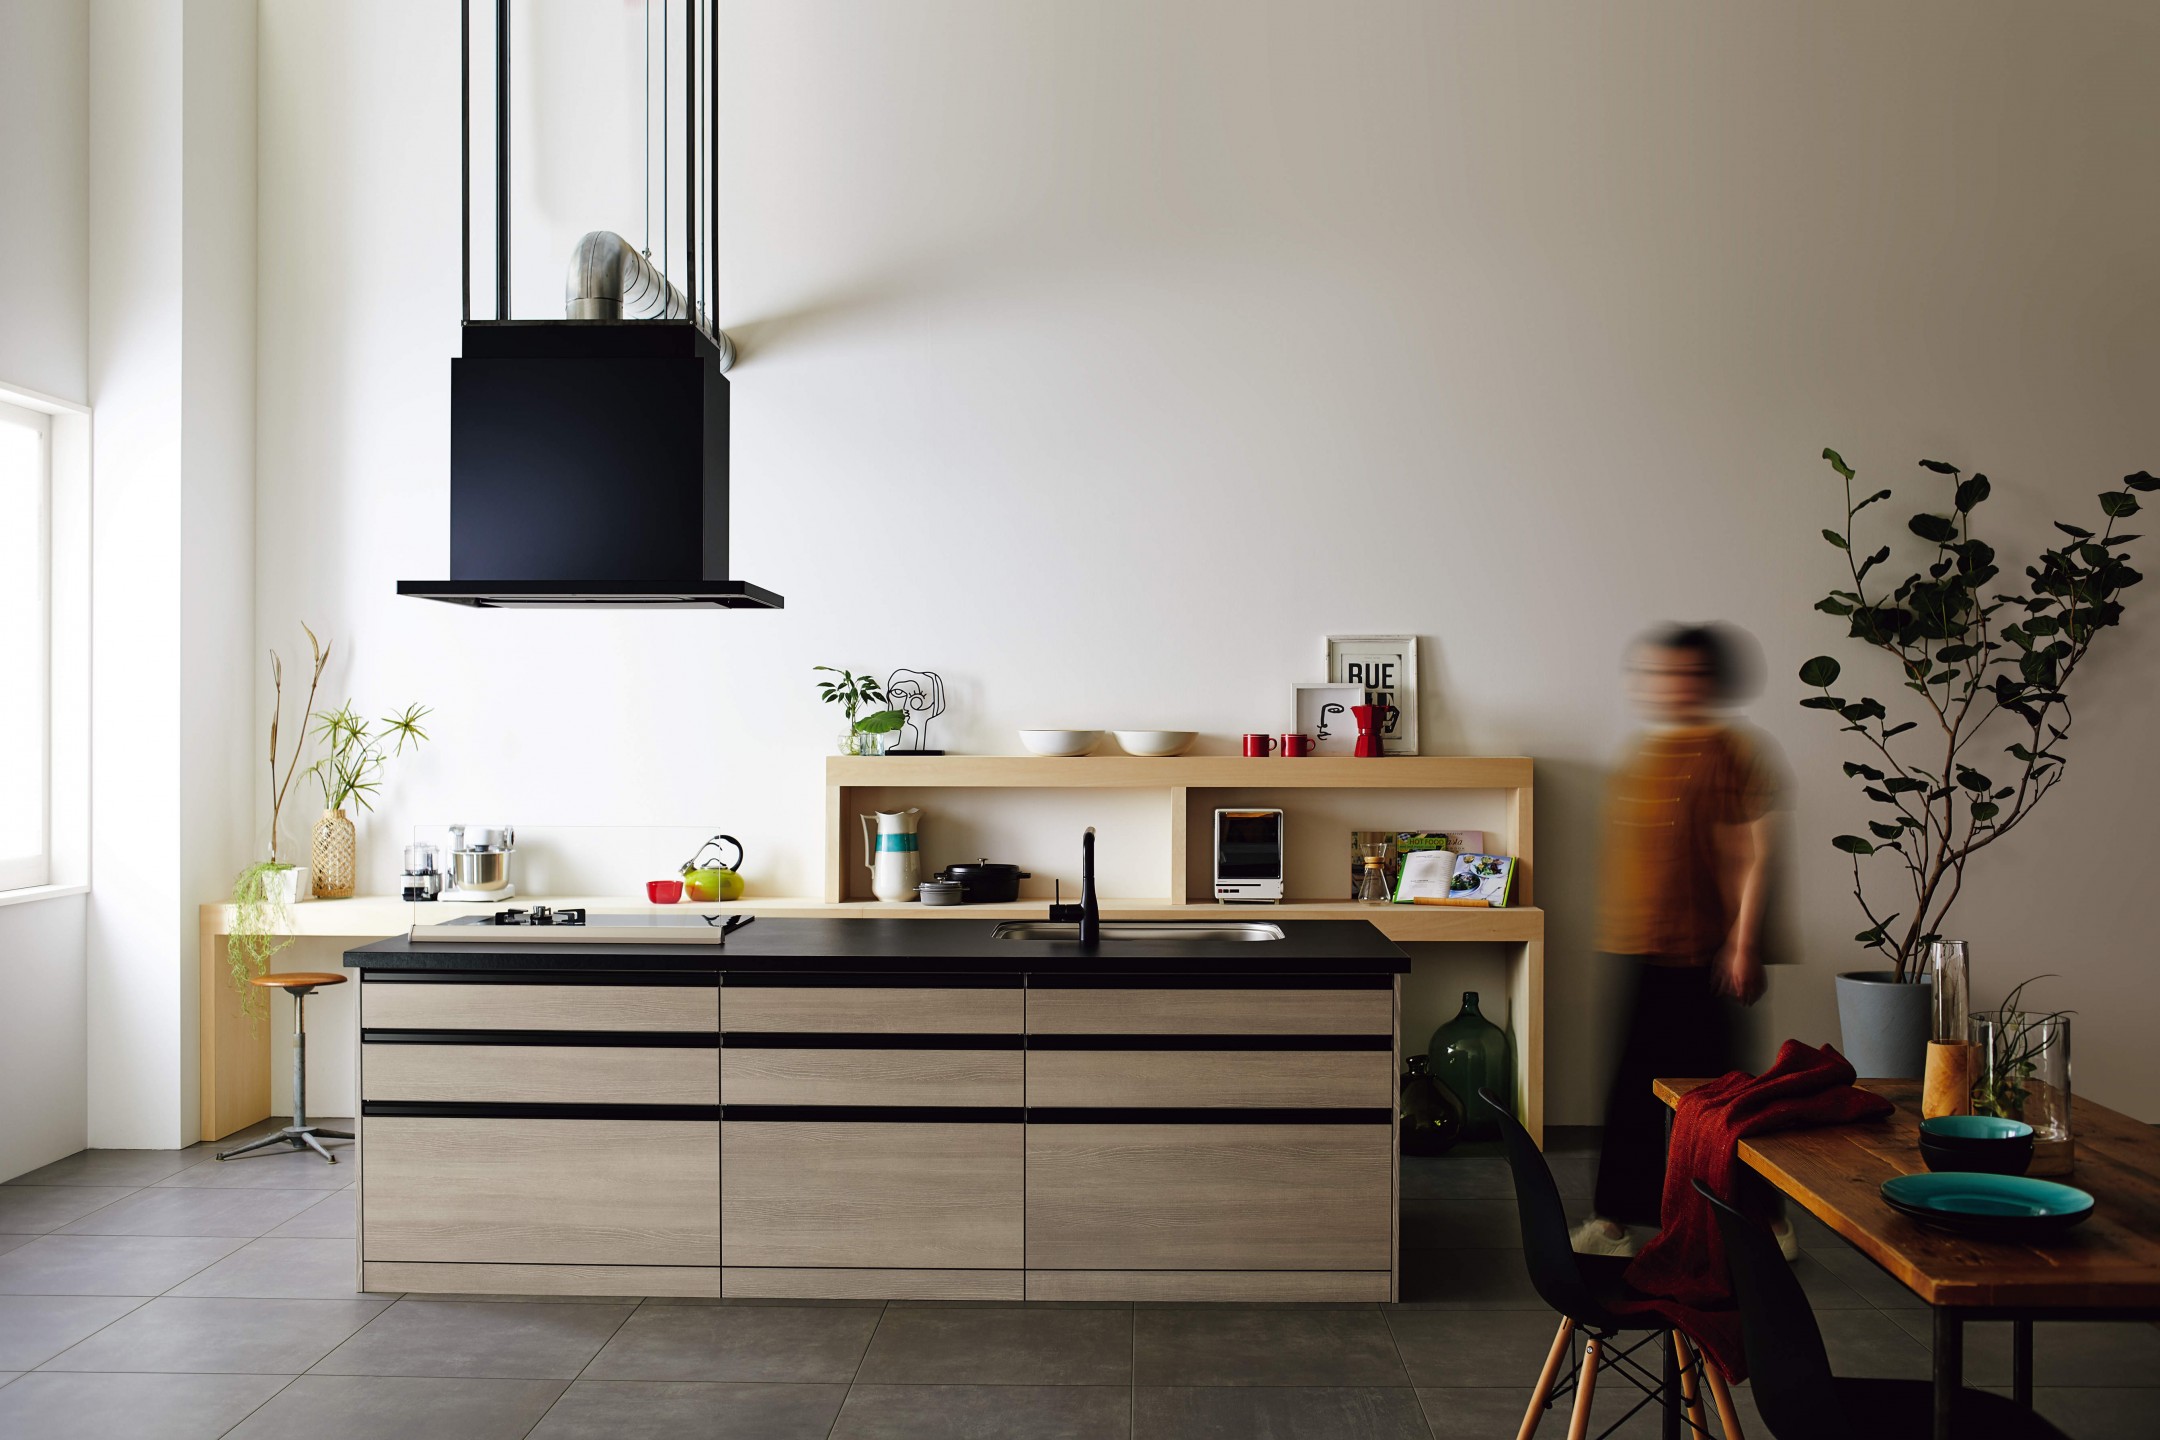 squarerooms song-cho kitchen stainless steel fittings wood look panels woman neutral pared down minimalist japanese